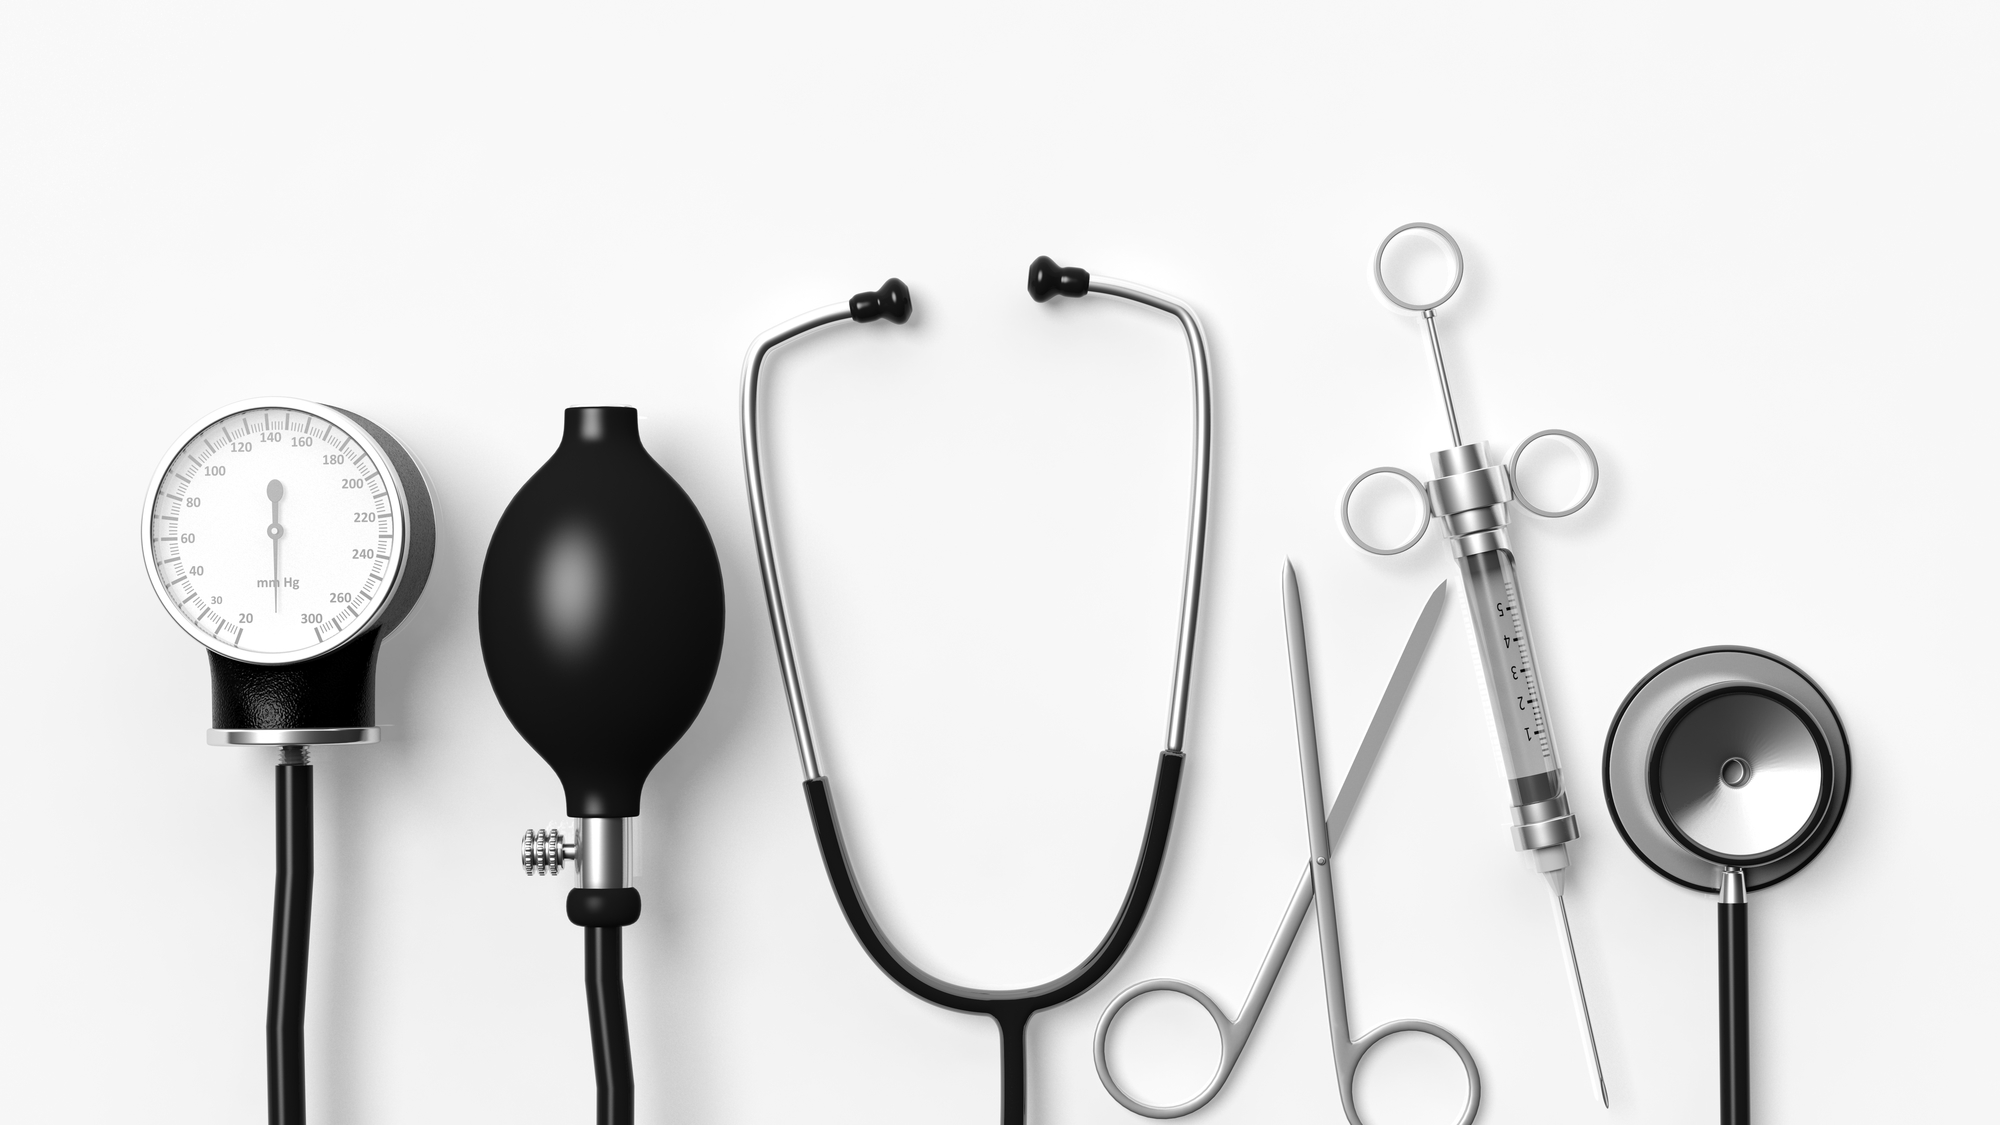 Medical Supplies and Equipment Needed to Start A Medical Practice - Dr. Bill